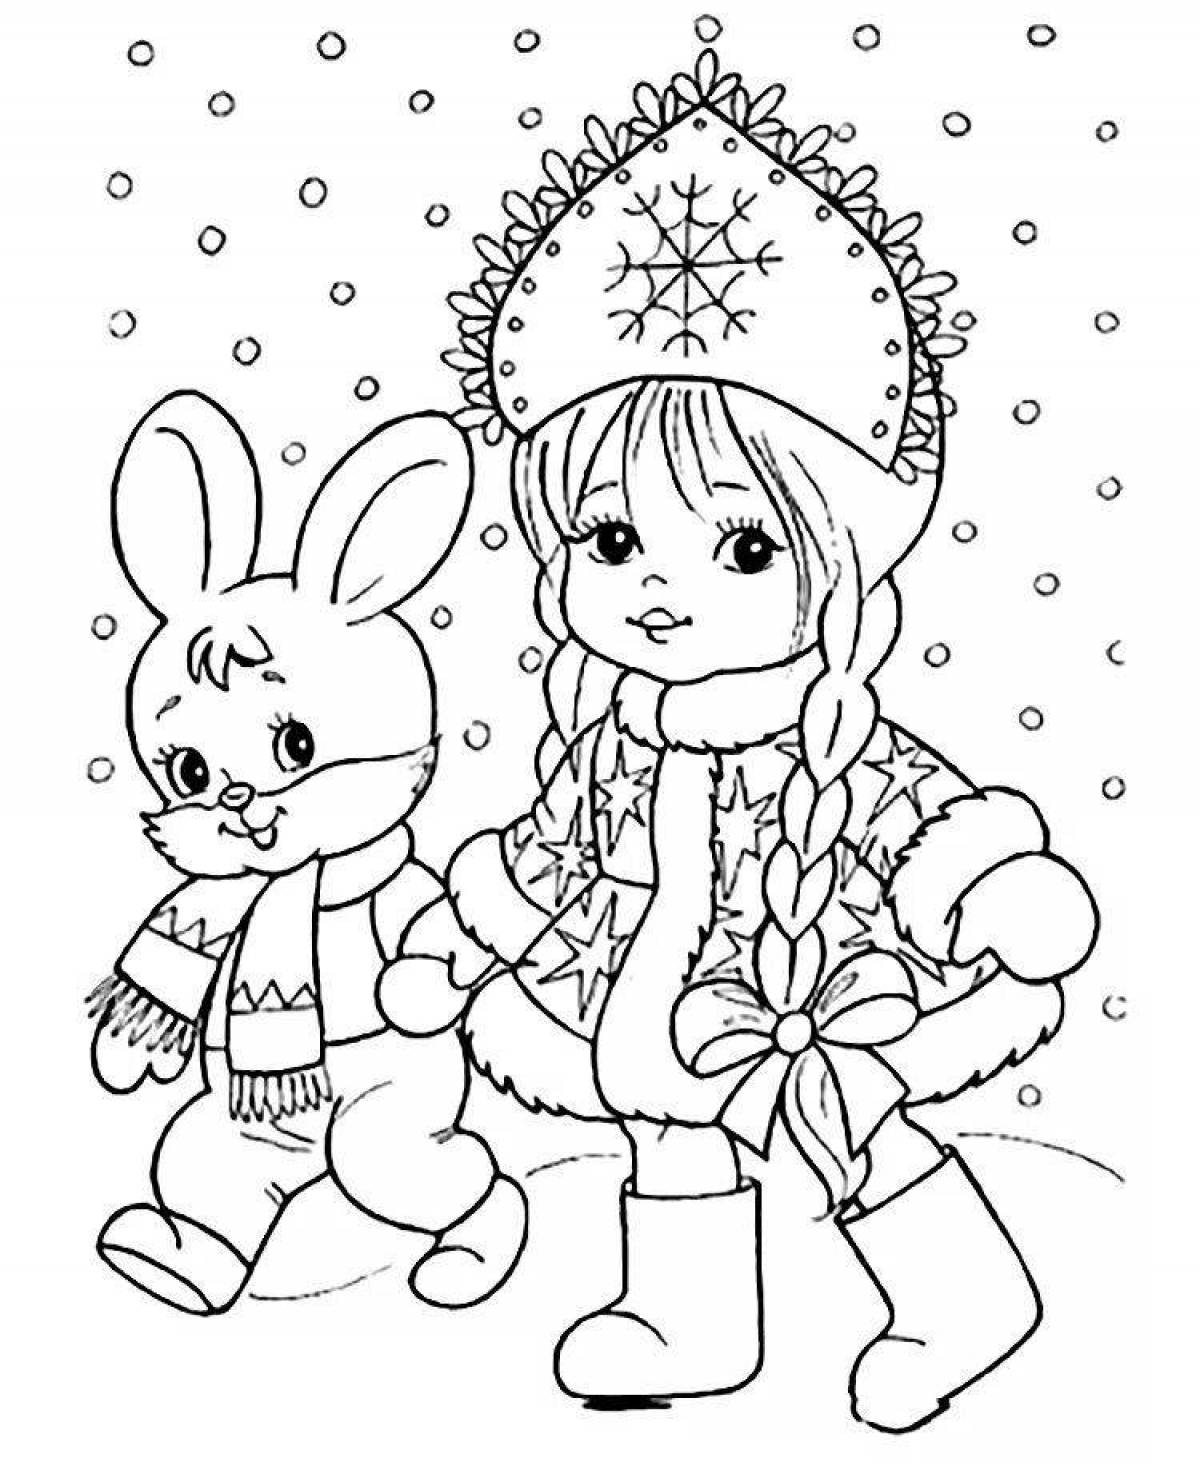 A fun Christmas coloring book for girls